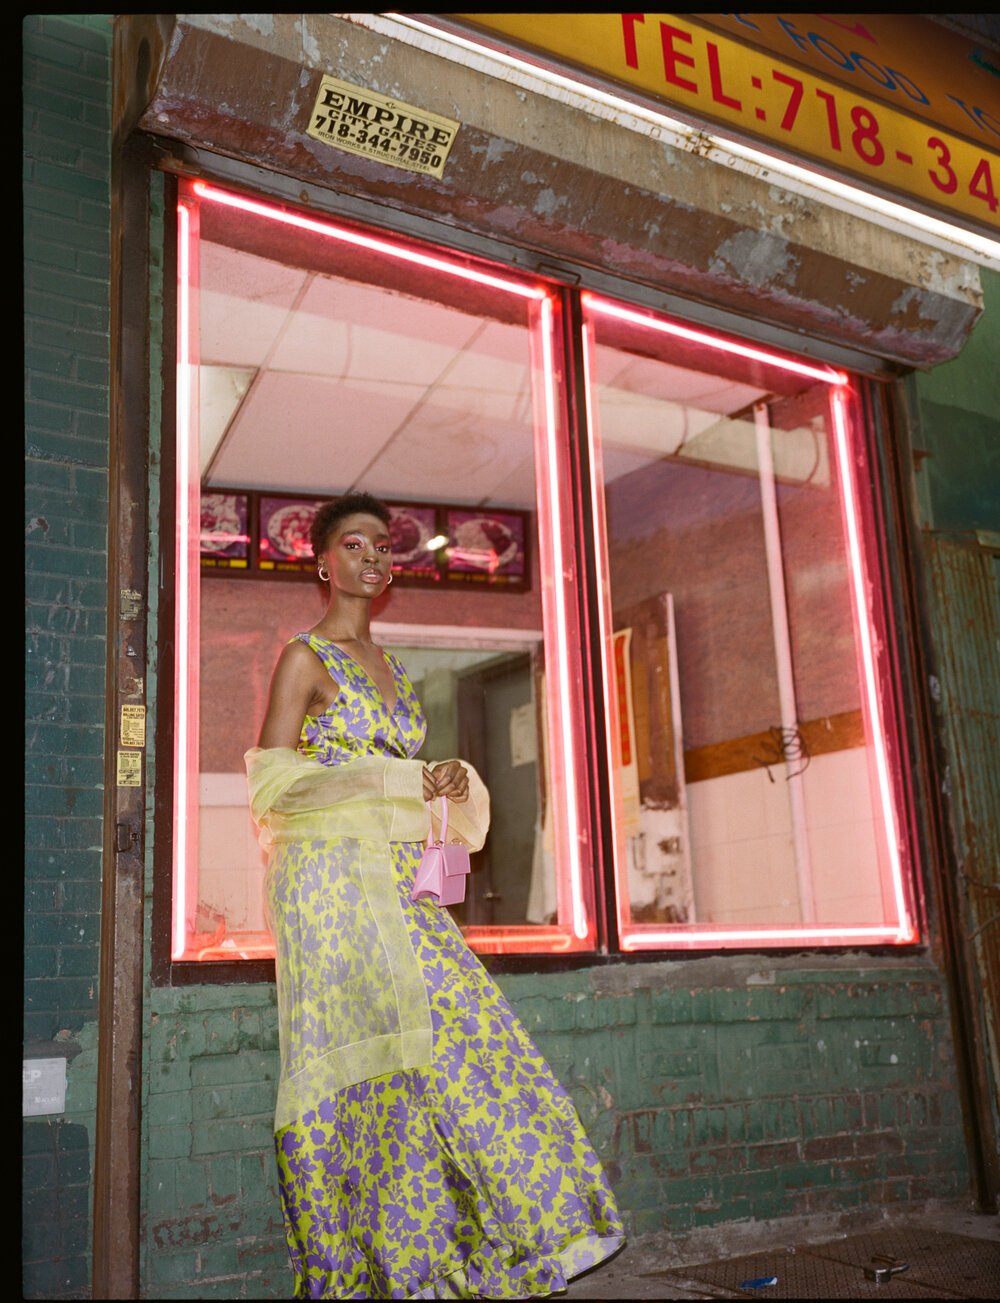  Model posing in Brooklyn, New York against Chinese takeout in high-fashion, styled by Emily Burnette.  